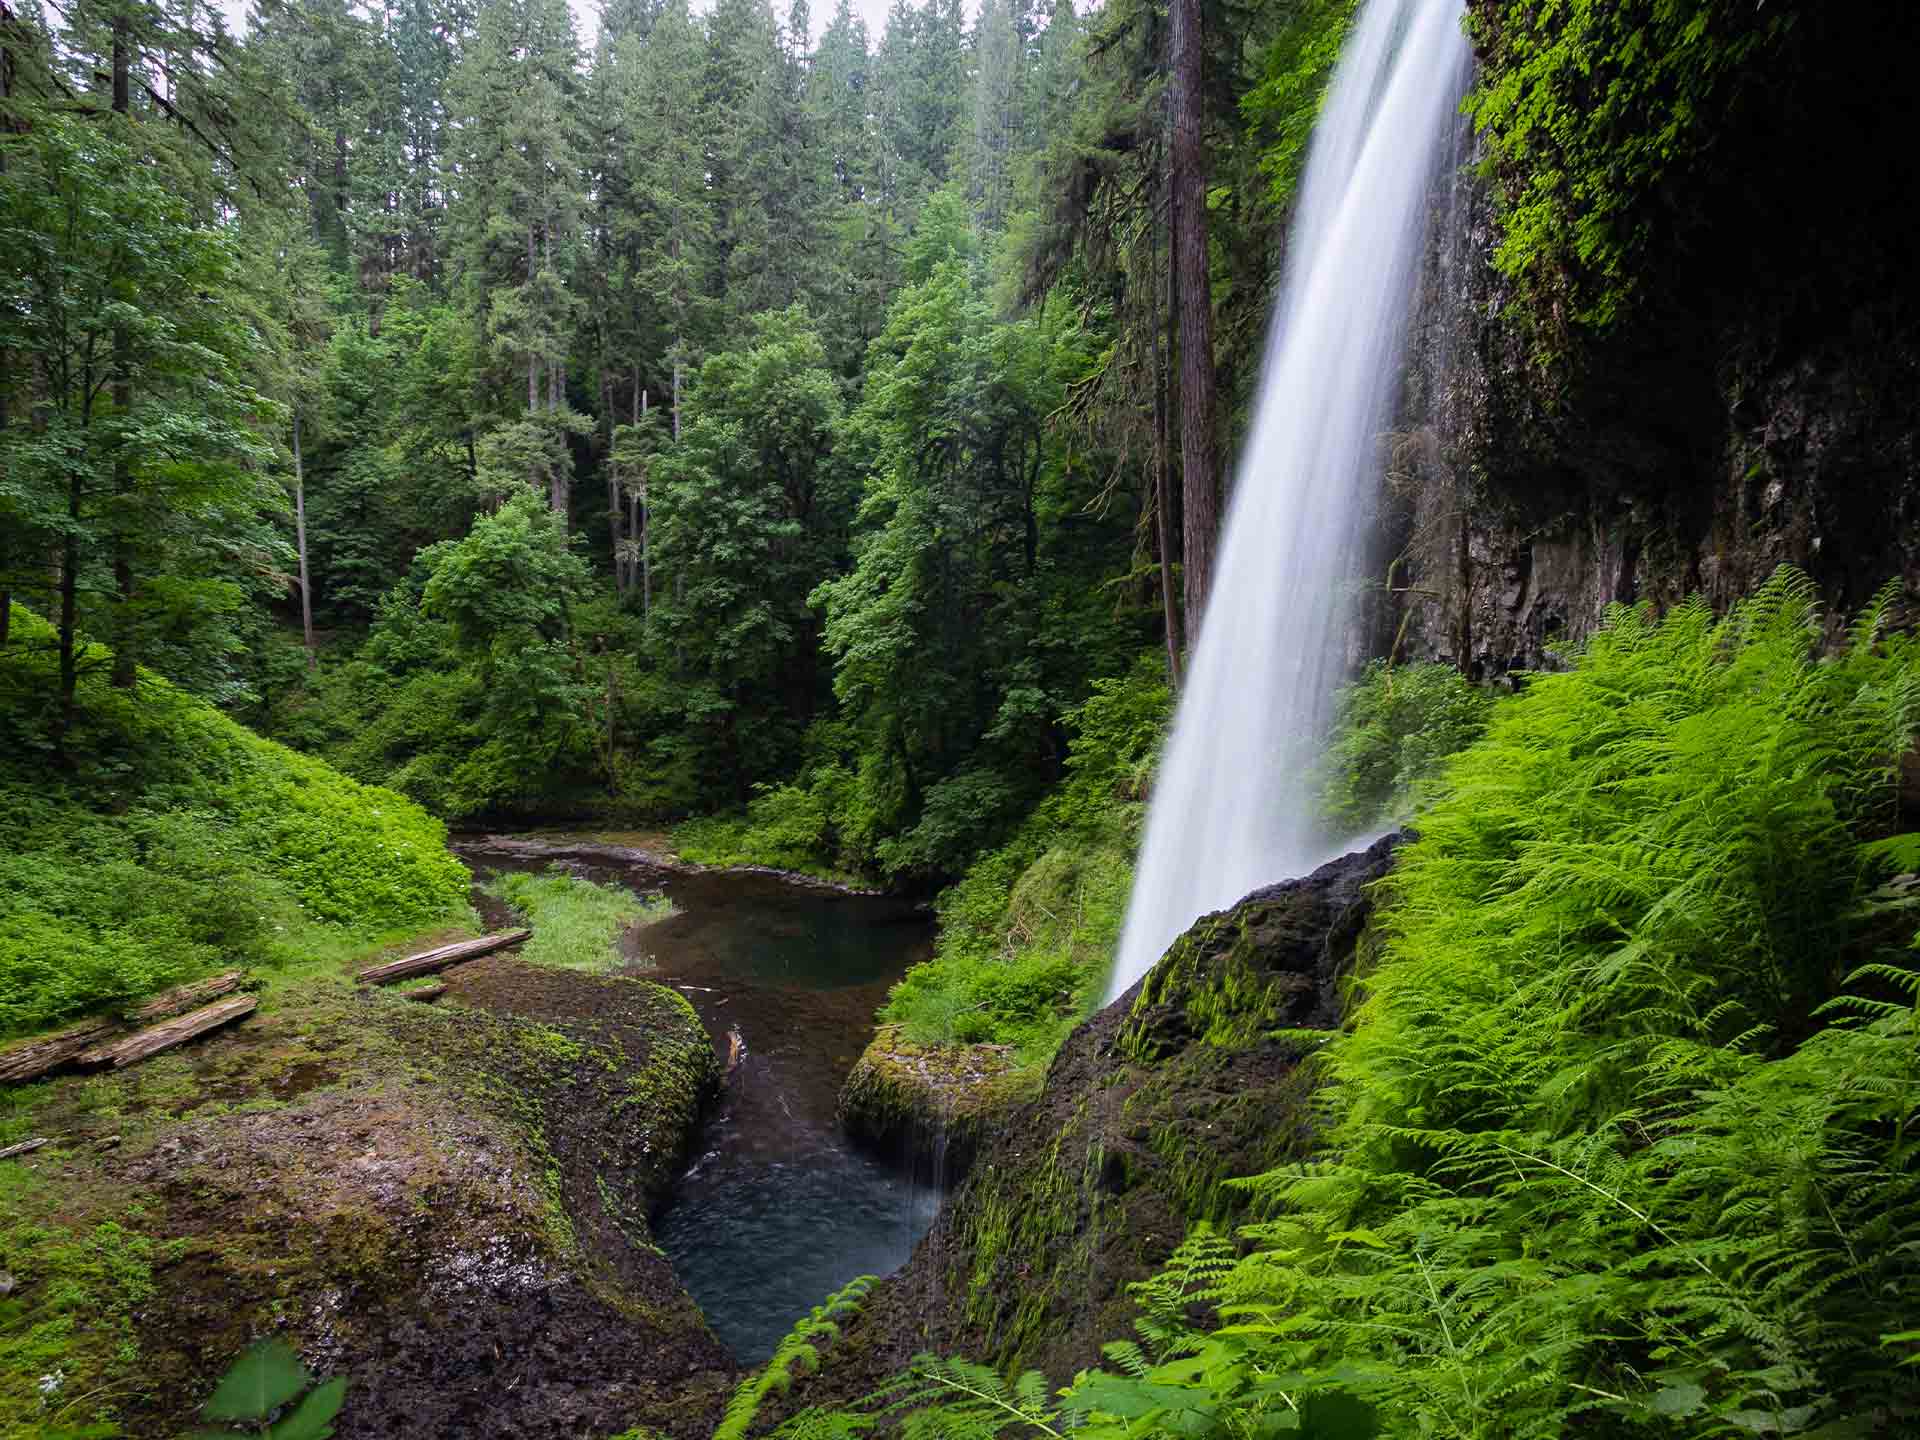 The Best Hiking Spots In Oregon: A Guide To The Top 15 Trails